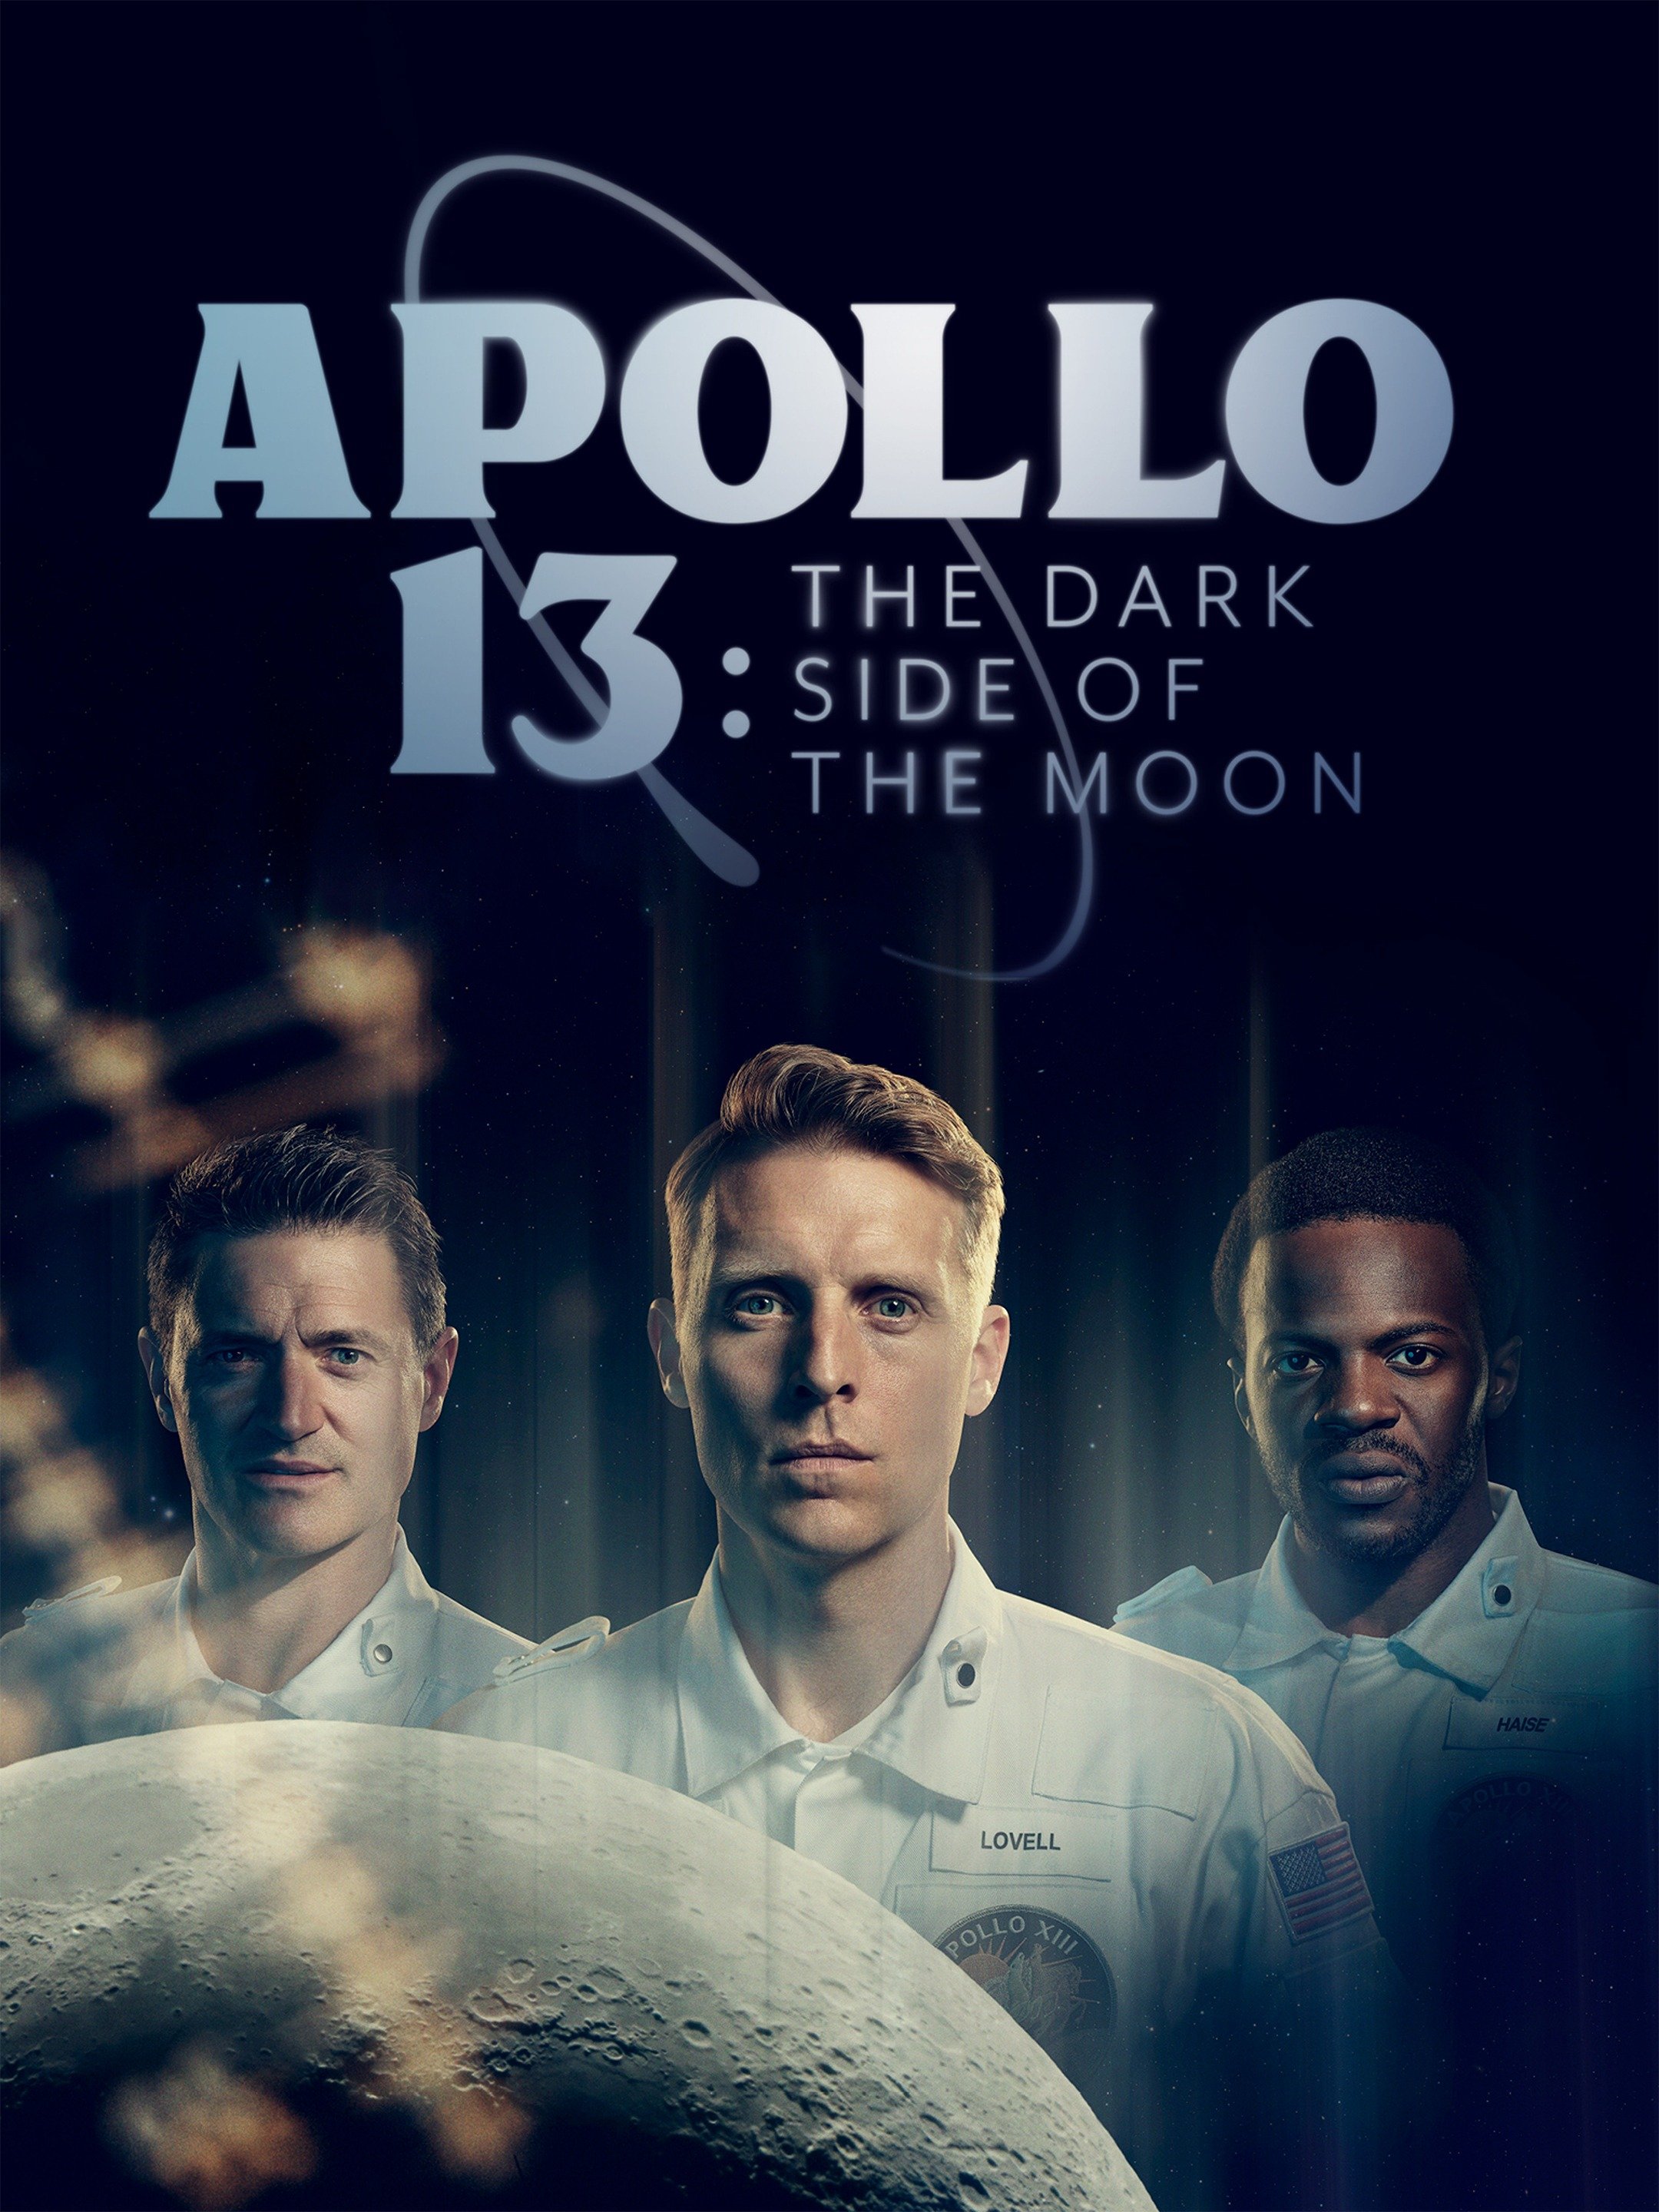 Apollo 13 The Dark Side of the Moon Movie Reviews